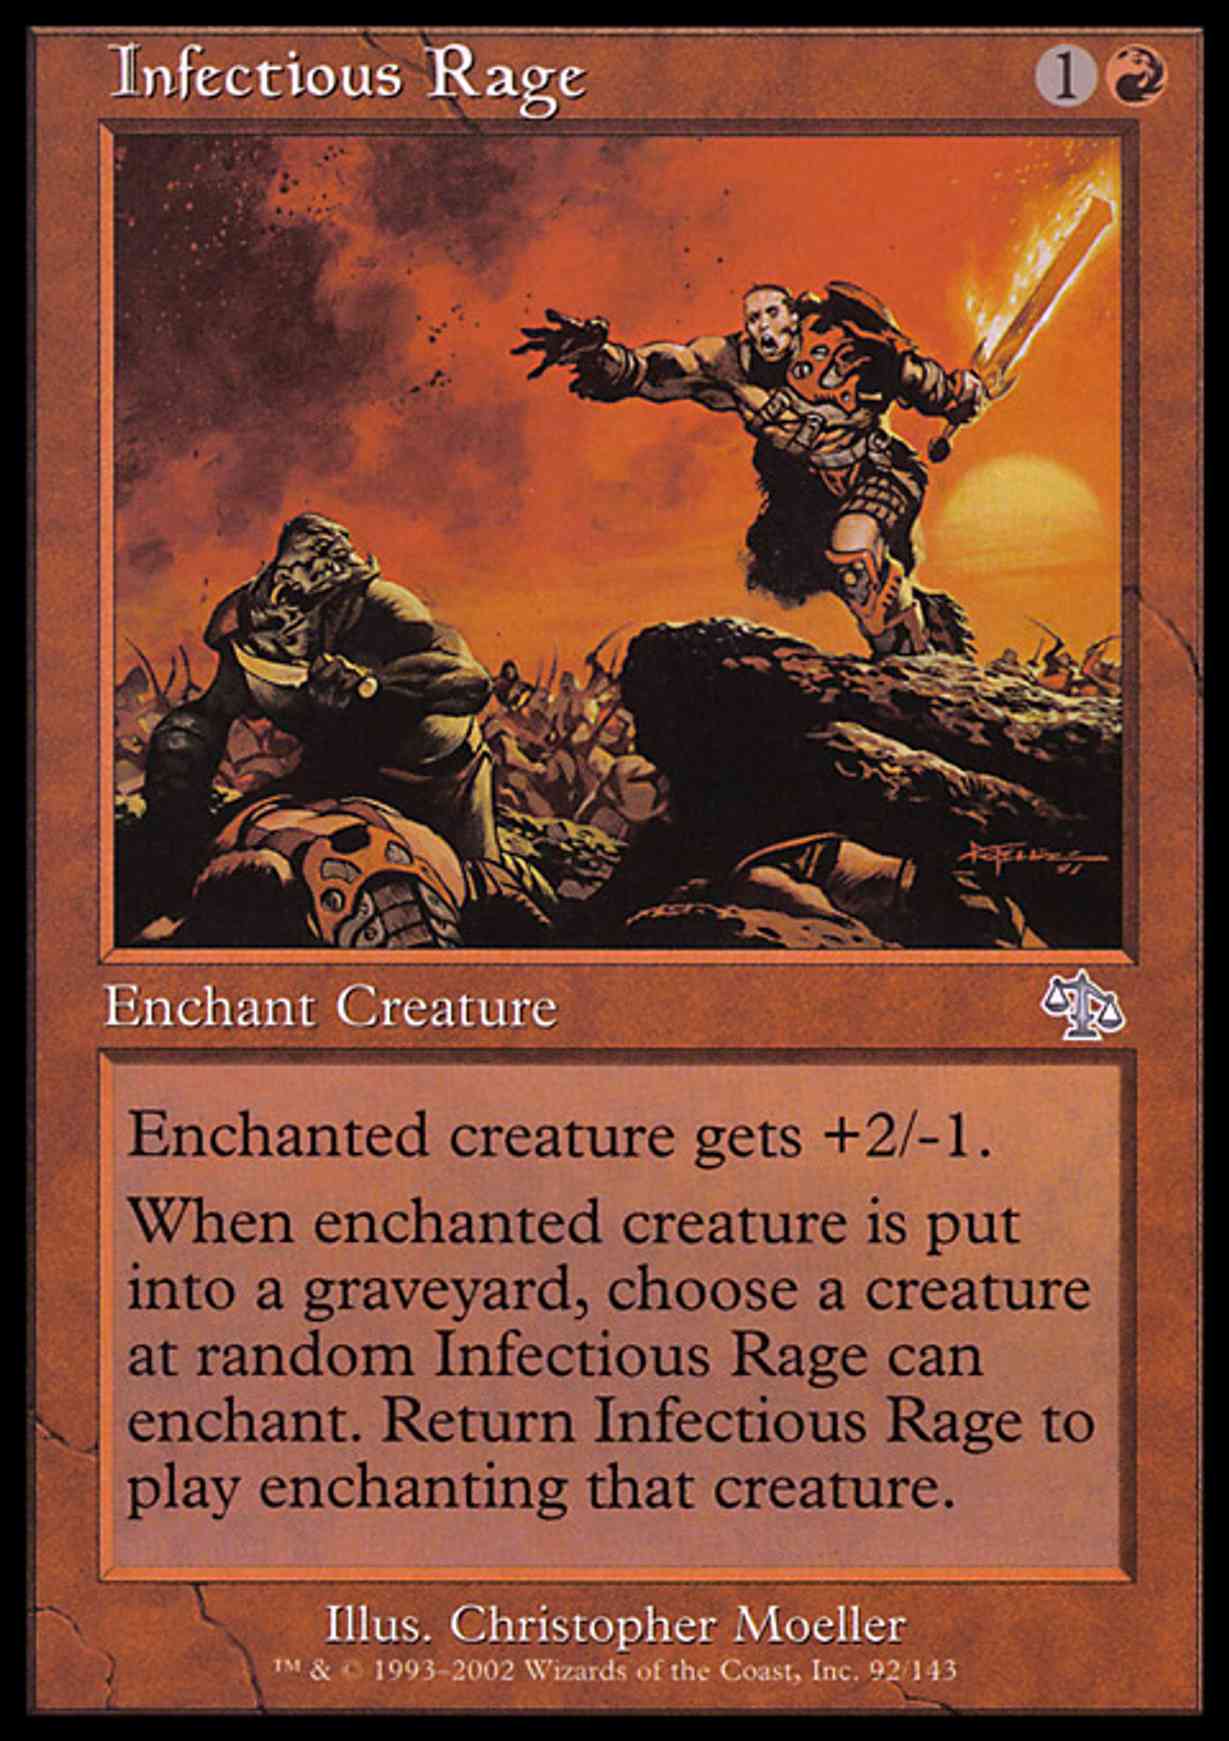 Infectious Rage magic card front